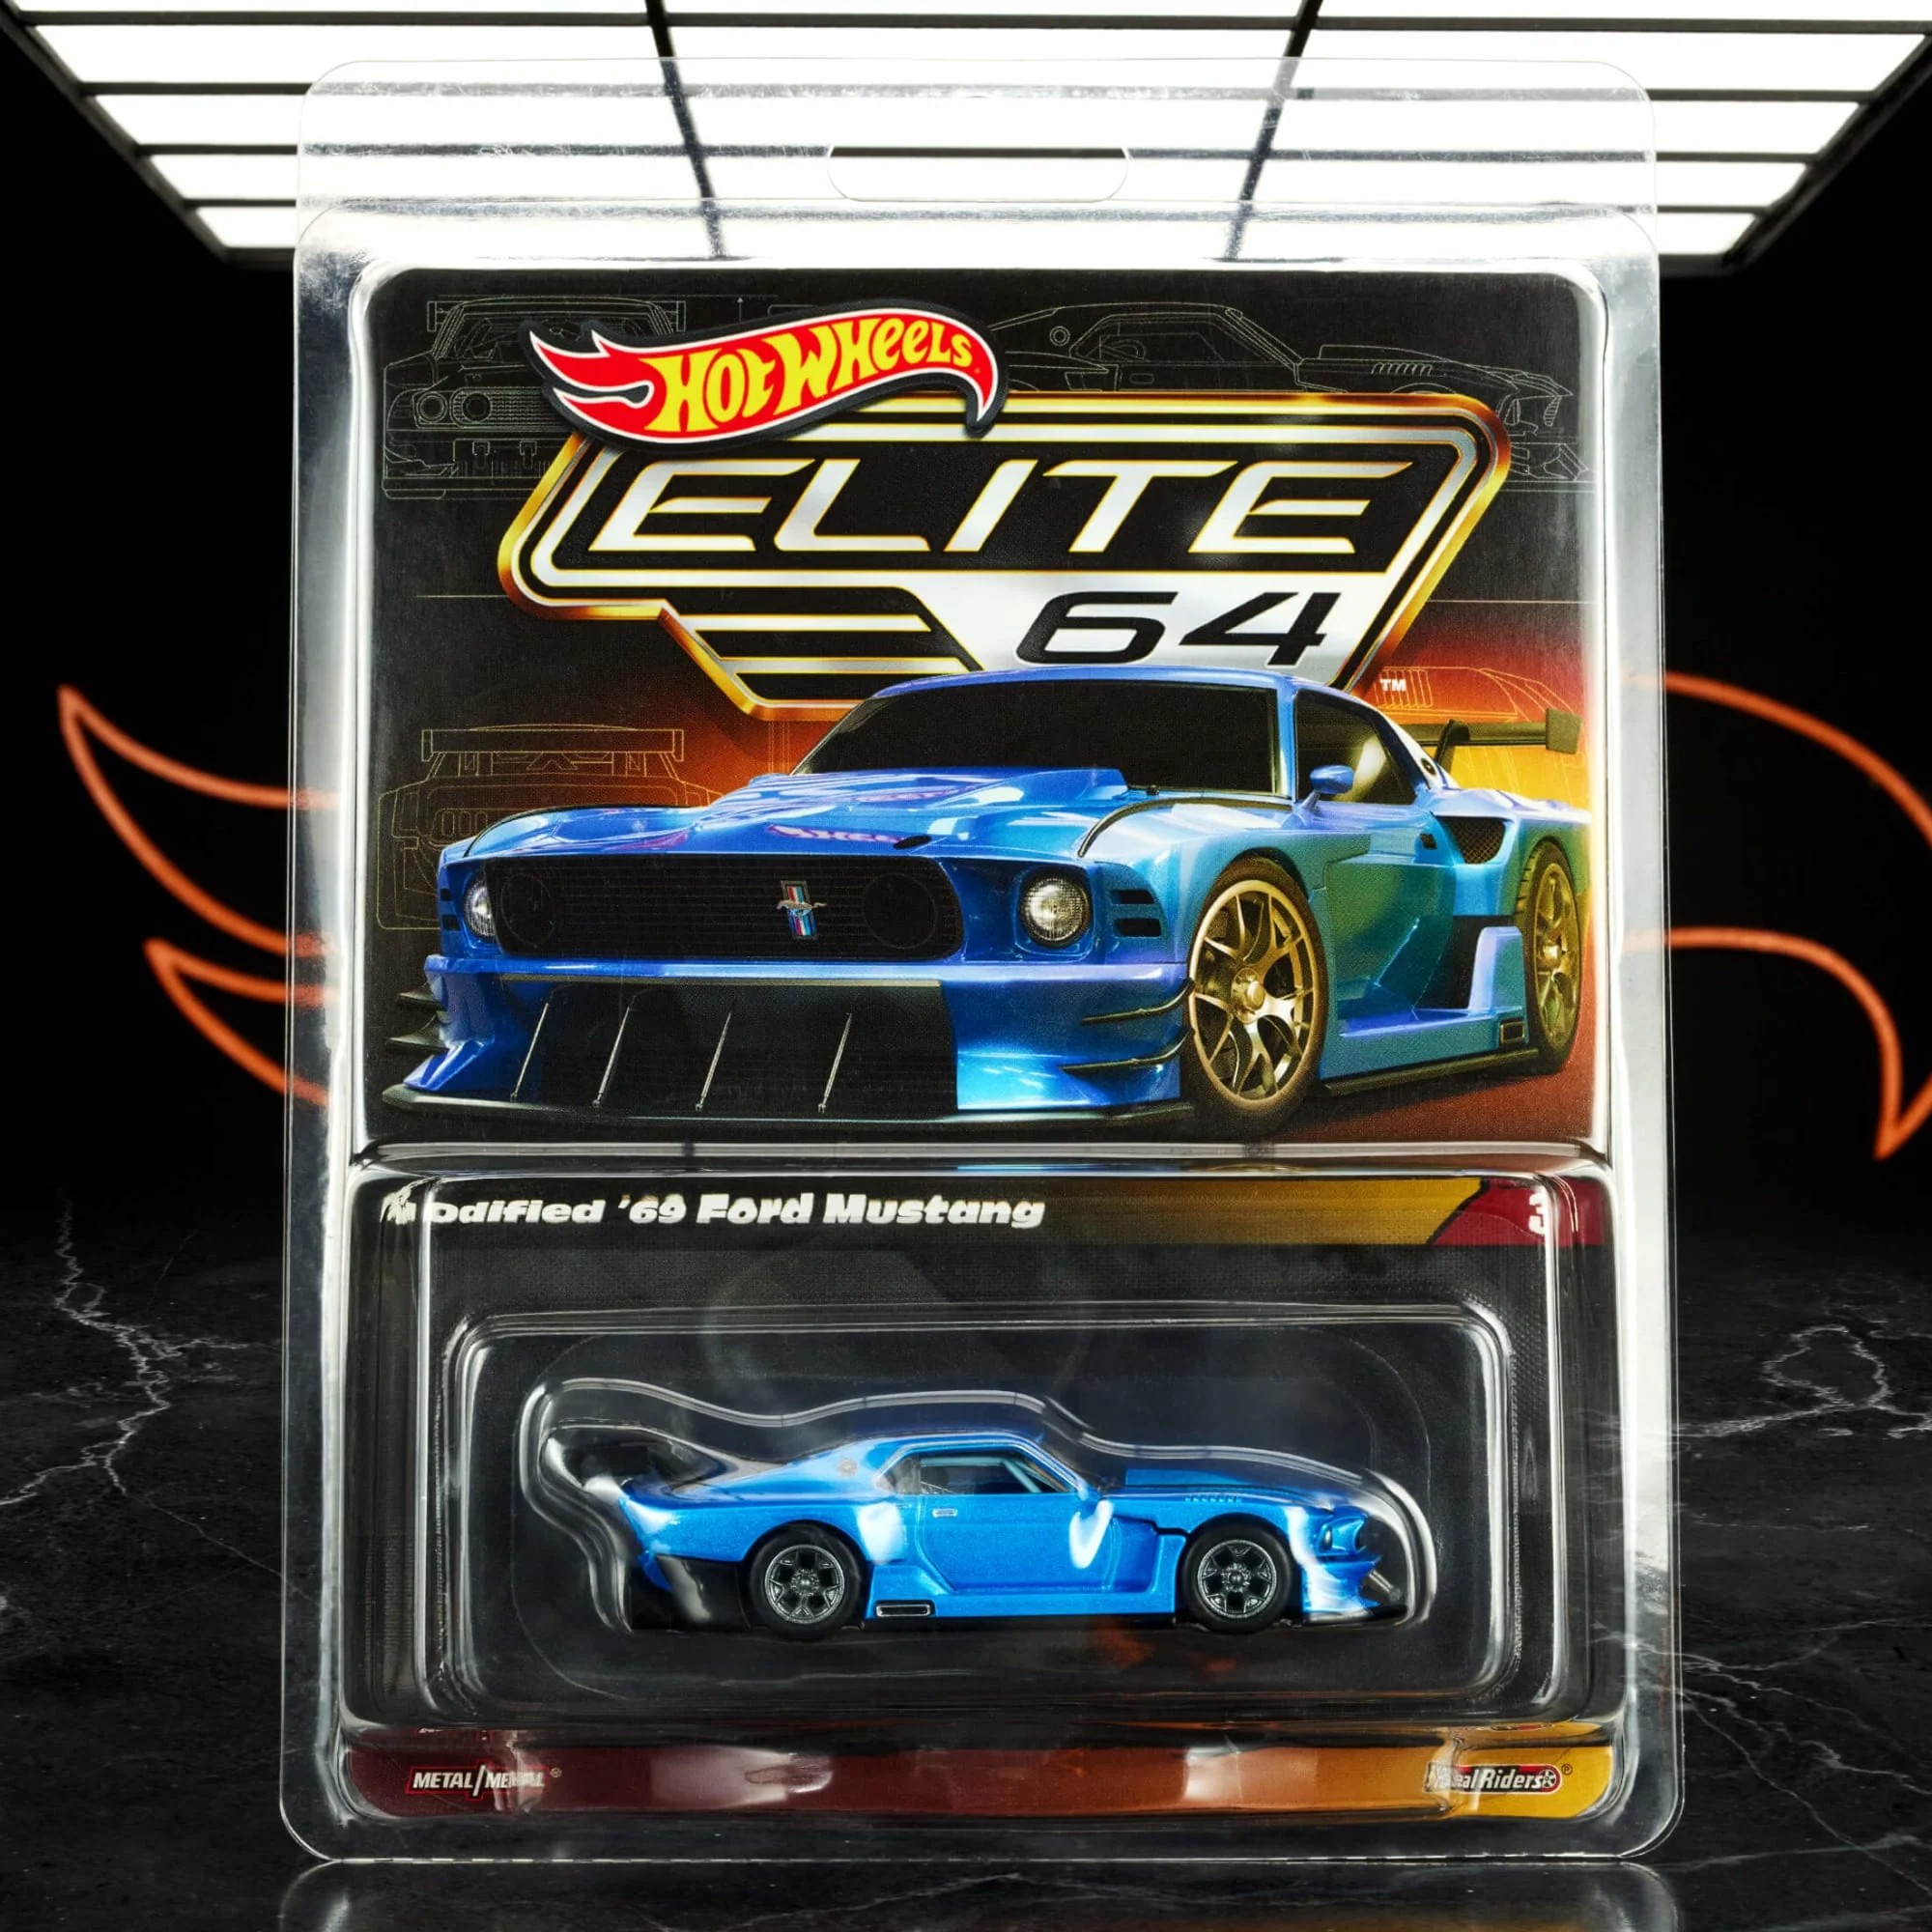 Hot Wheels HWC Elite 64 Series Modified '69 Ford Mustang